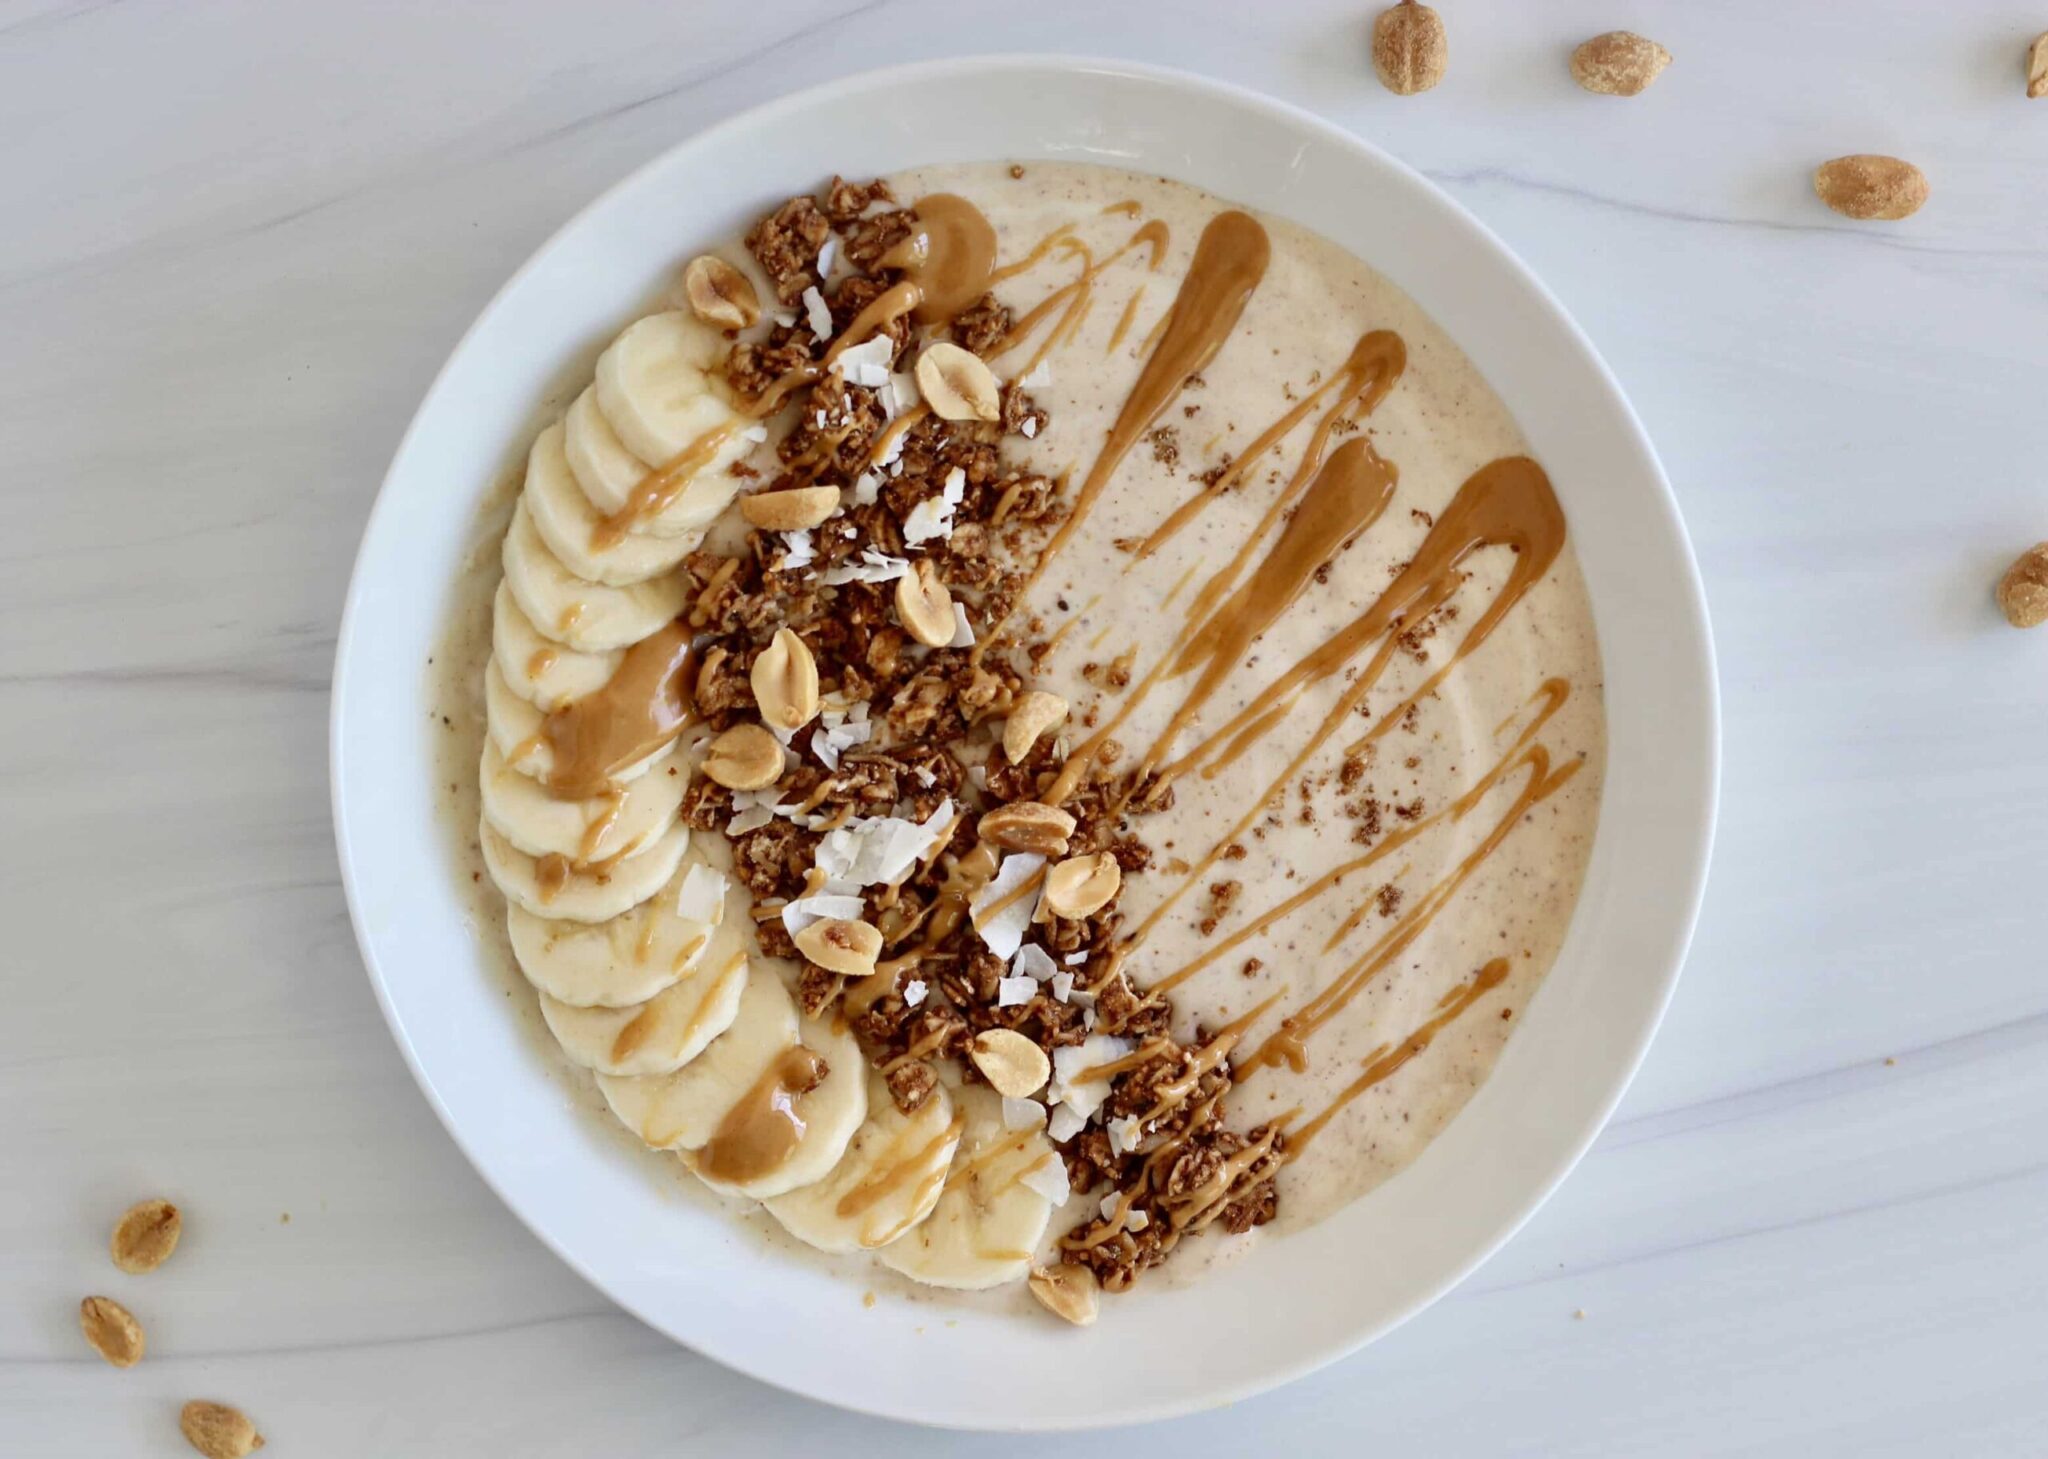 Peanut Butter Smoothie Bowl - How to Make a Thick Smoothie Bowl